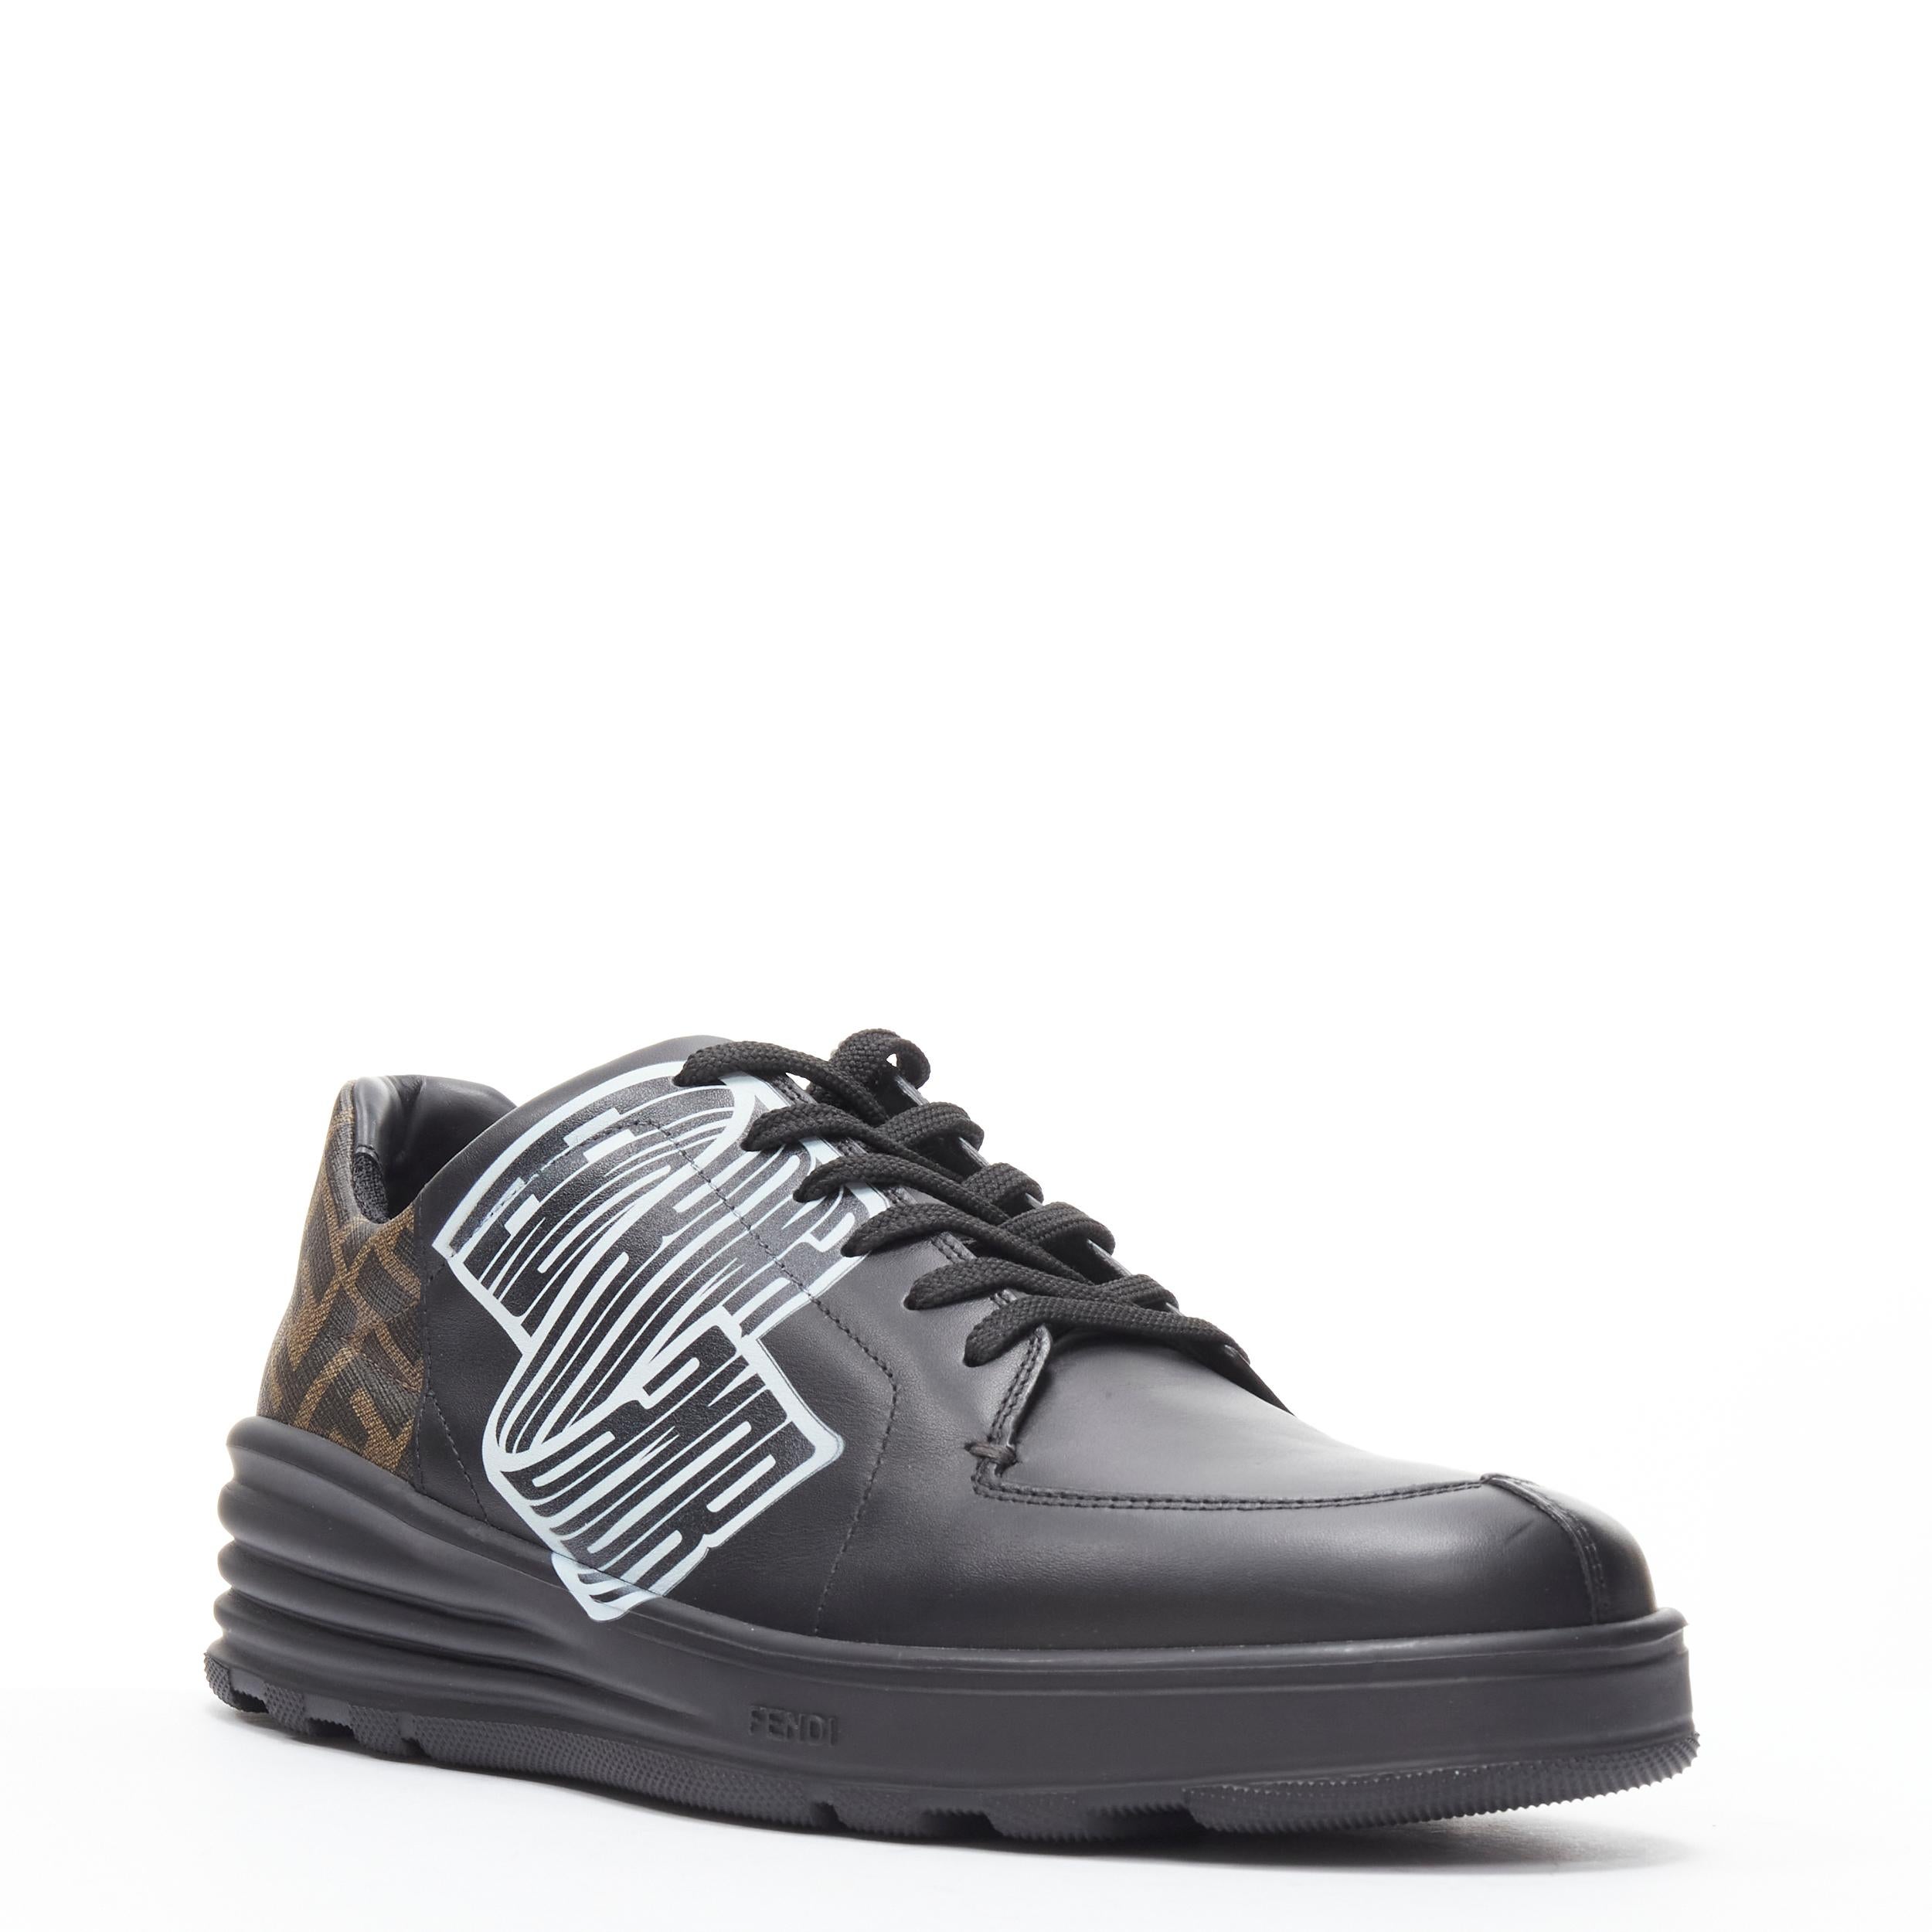 new FENDI Amor Roma black leather print Zucca FF monogram sneakers UK8 EU42 
Reference: TGAS/B01606 
Brand: Fendi 
Model: Amor Roma black sneakers 
Material: Leather 
Color: Black 
Pattern: Solid 
Closure: Lace Up 
Extra Detail: Graphic print on